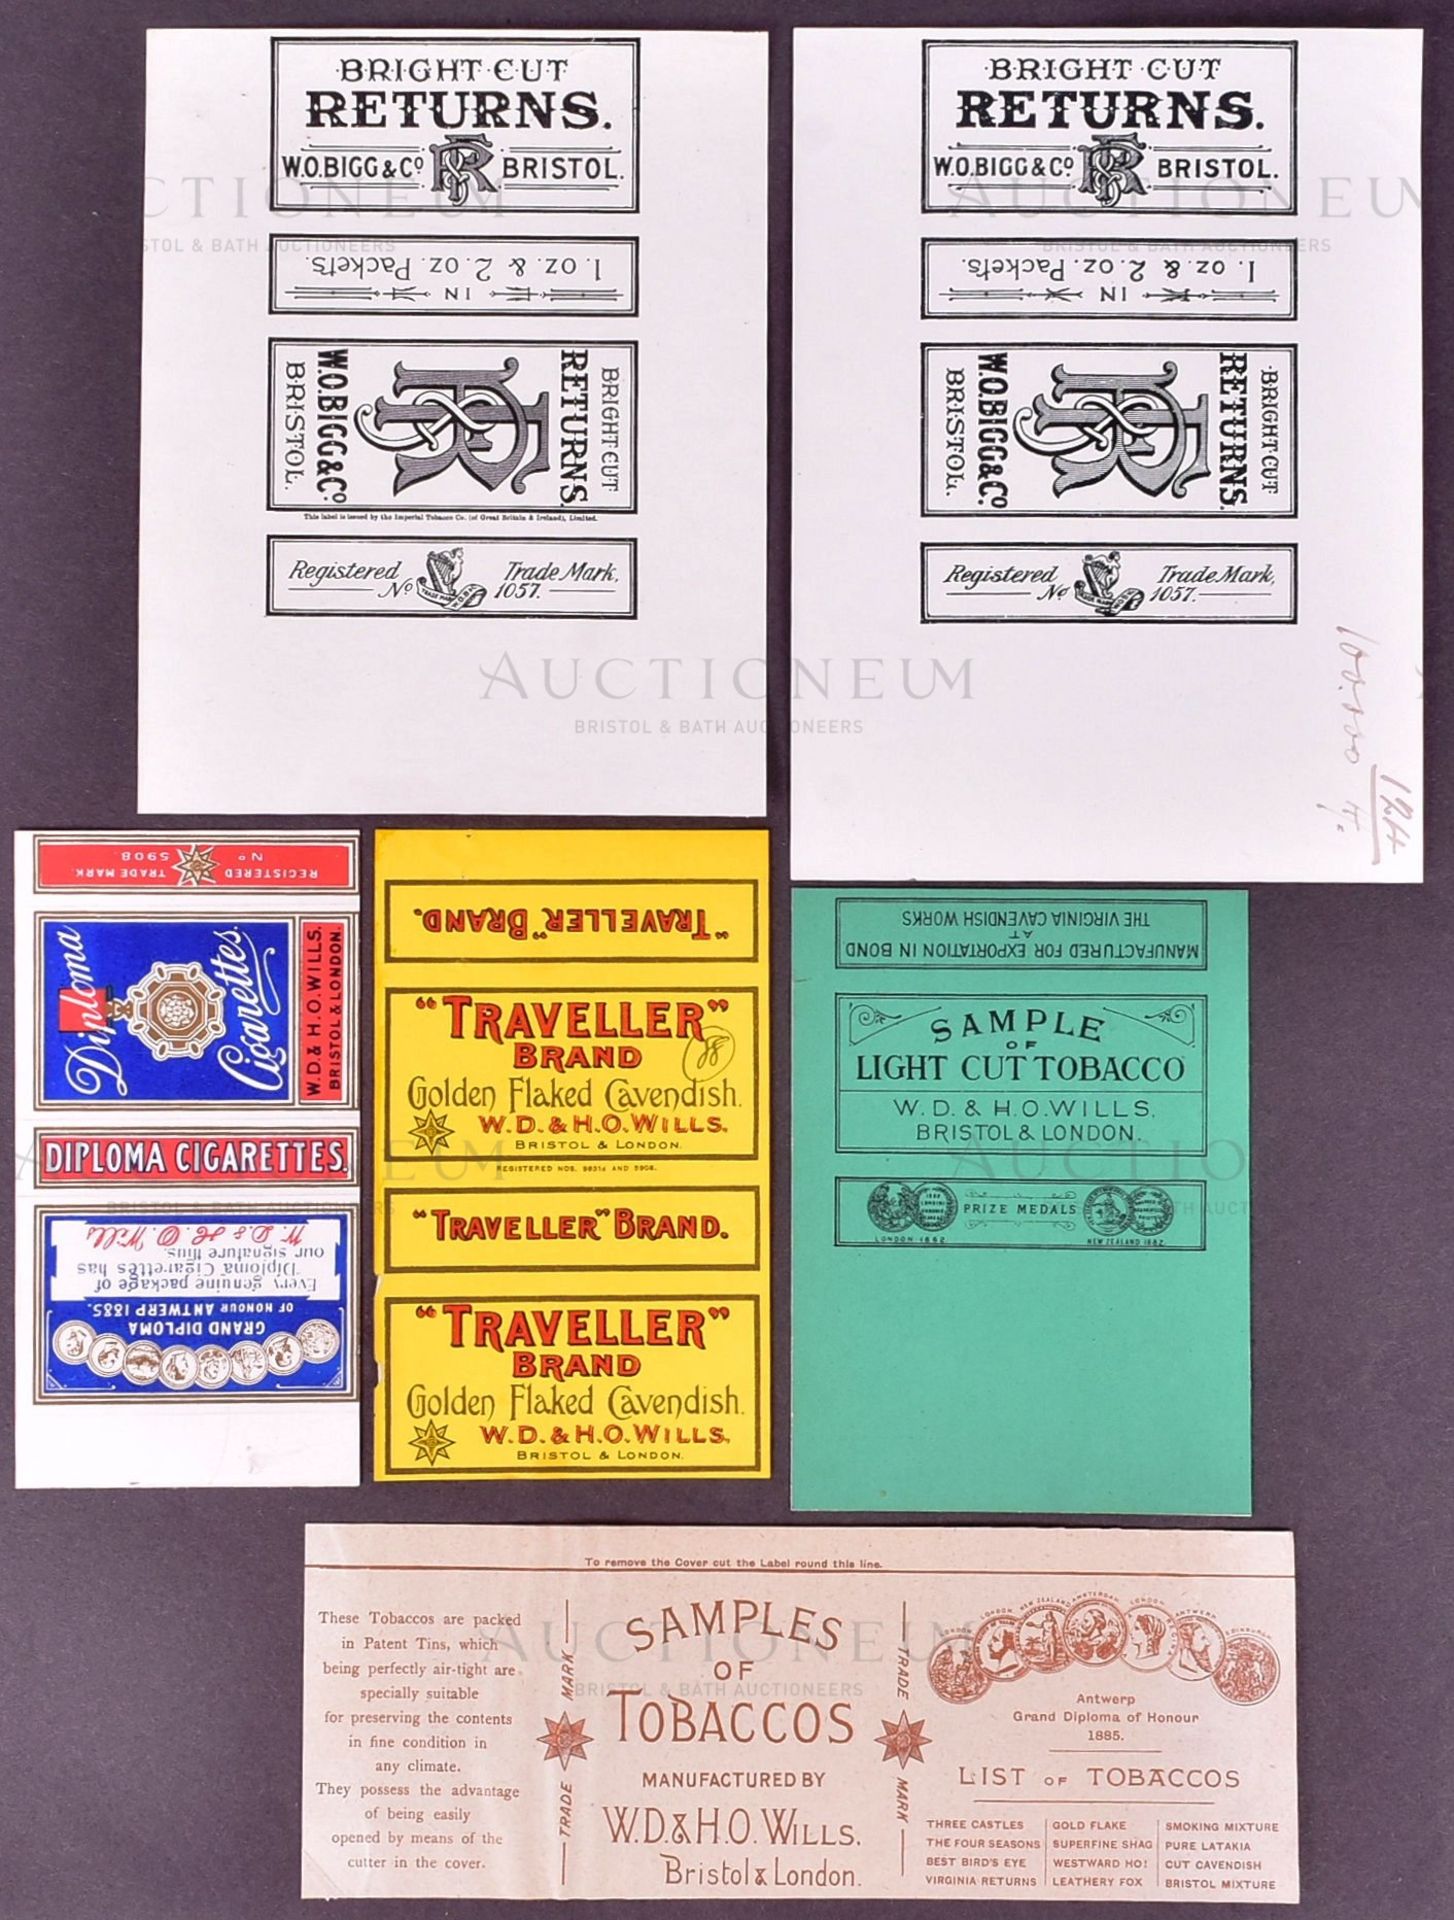 MARDON, SON & HALL - EARLY 20TH CENTURY CIGARETTE PACKET DESIGNS